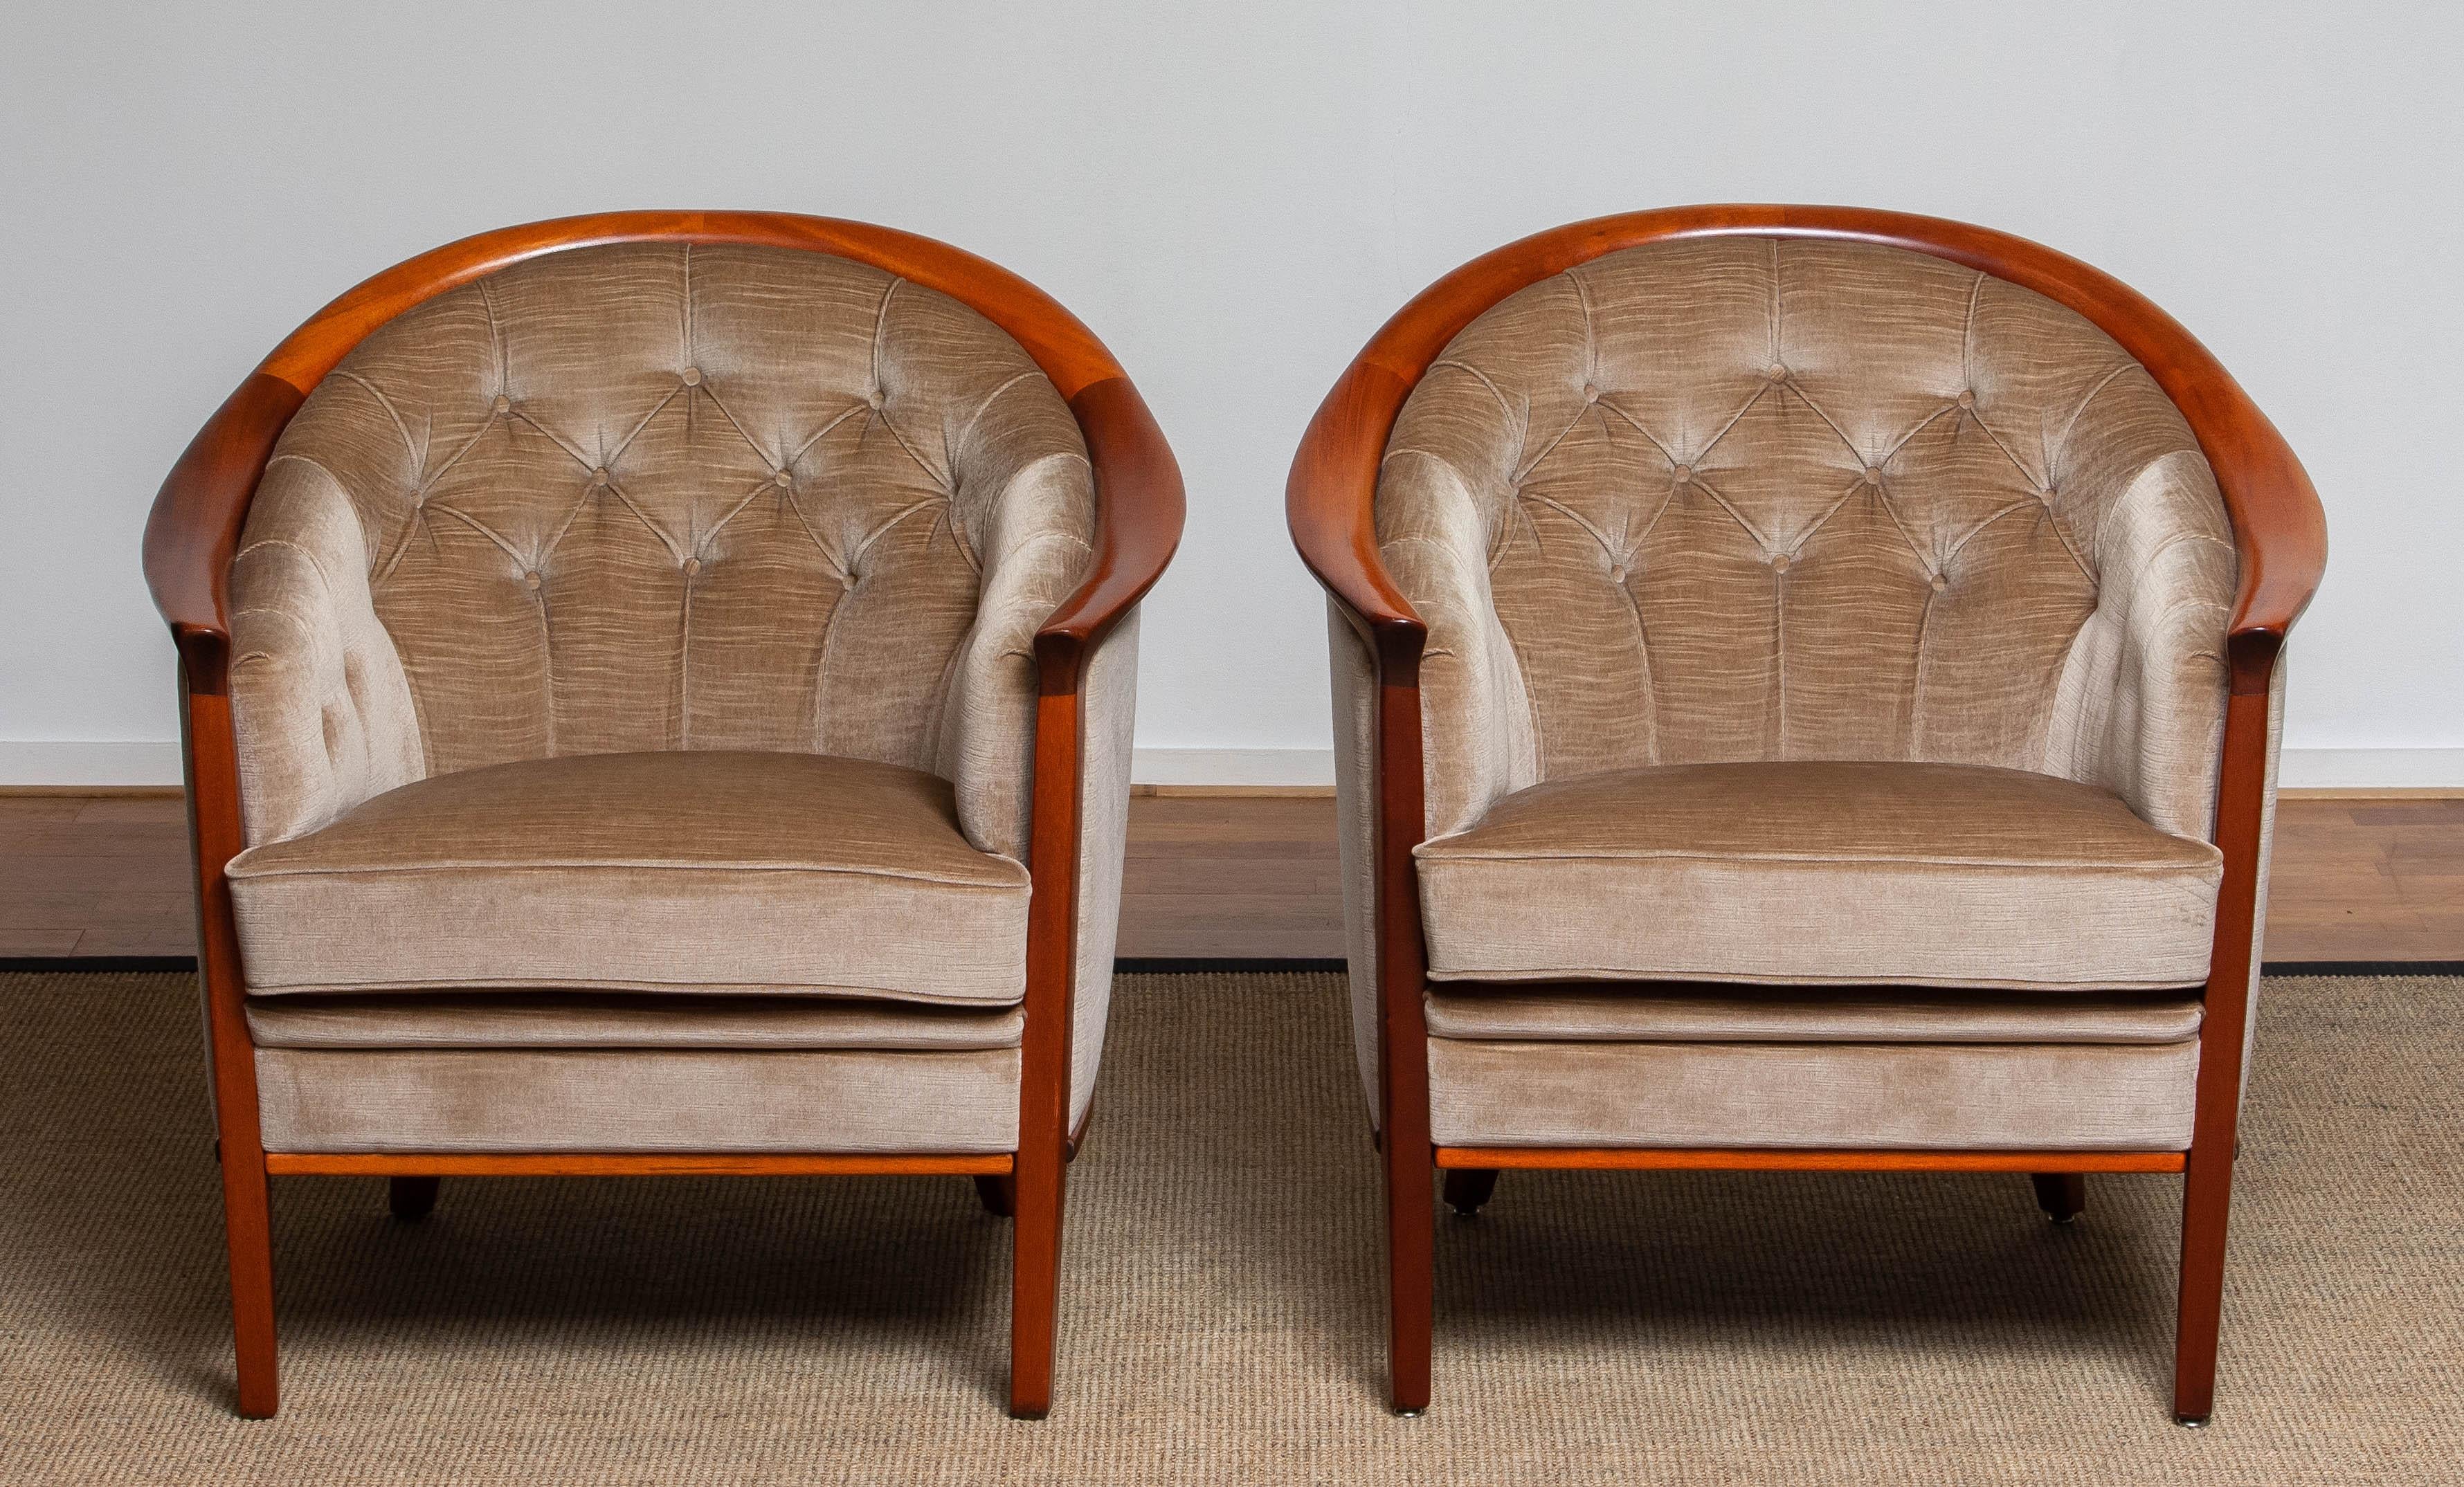 Beautiful set of two Scandinavian 'model Aristokrat' mahogany and padded taupe velvet lounge chairs designed by Bertil Fridhagen for Broderna Andersson / Broderna Anderssons Industrier Ekenässjön AB Sweden.
These high quality lounge chairs are